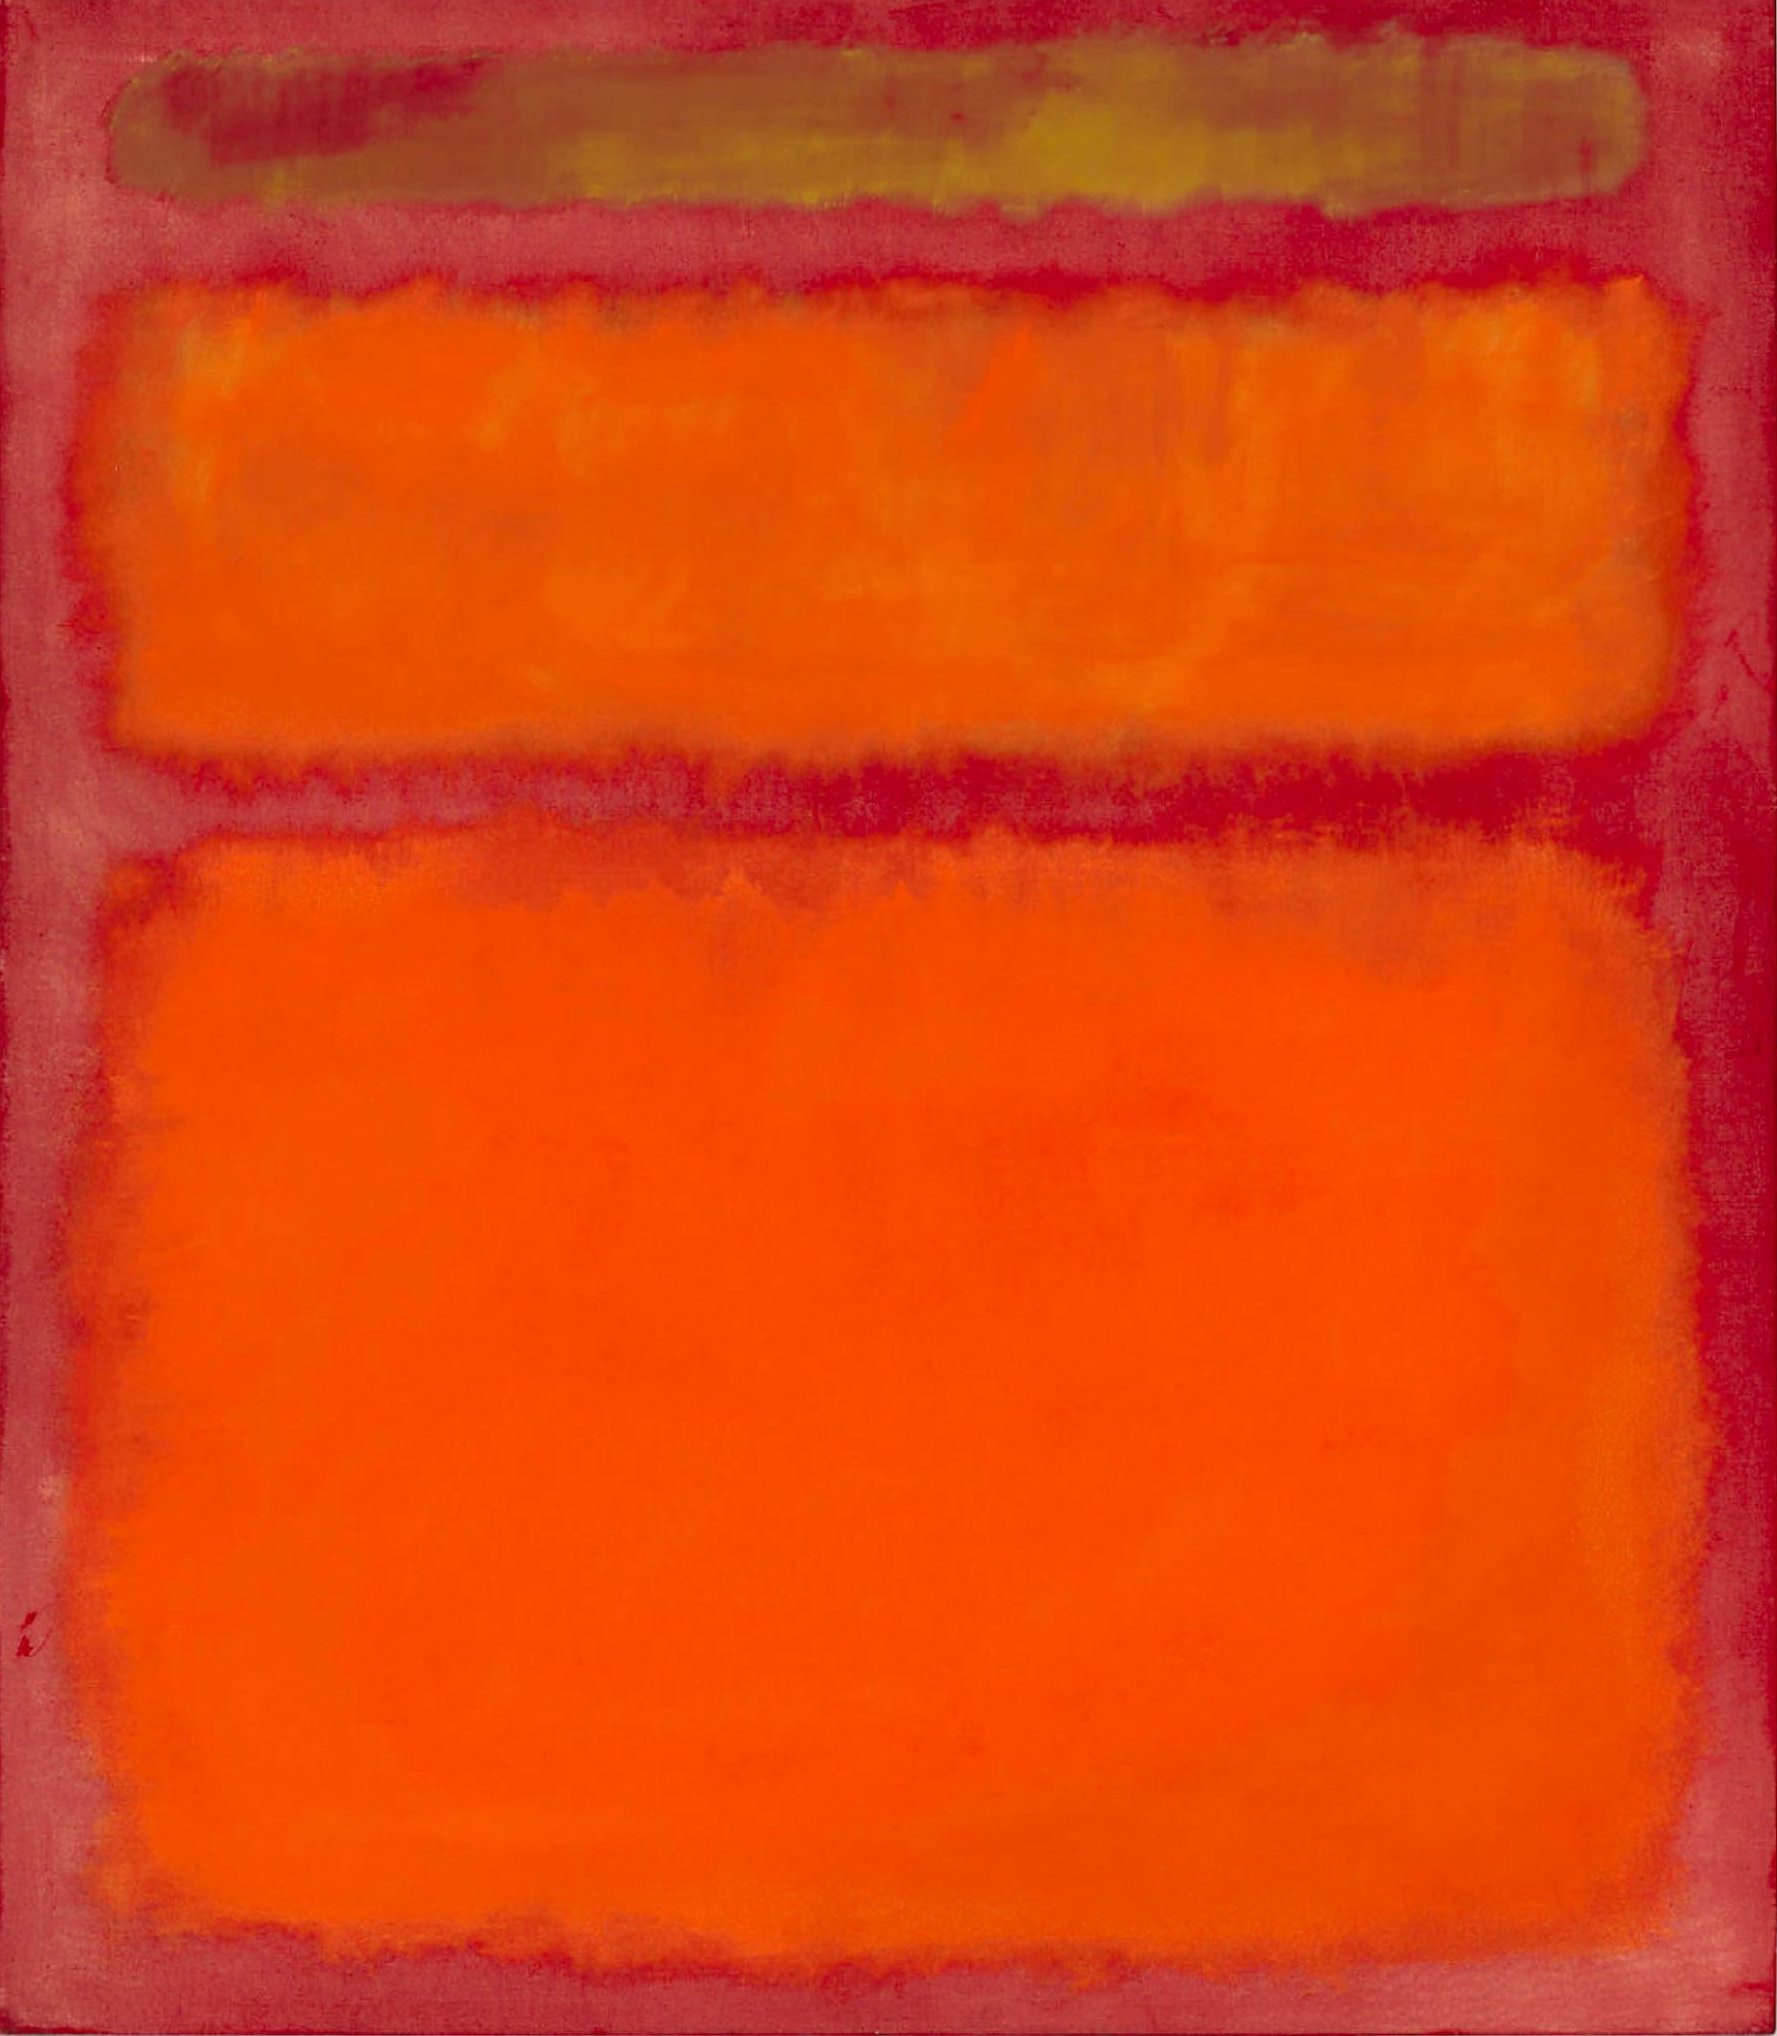 ROTHKO ART CENTER: The Legacy of One of the Most Significant Artists of the 20th Century